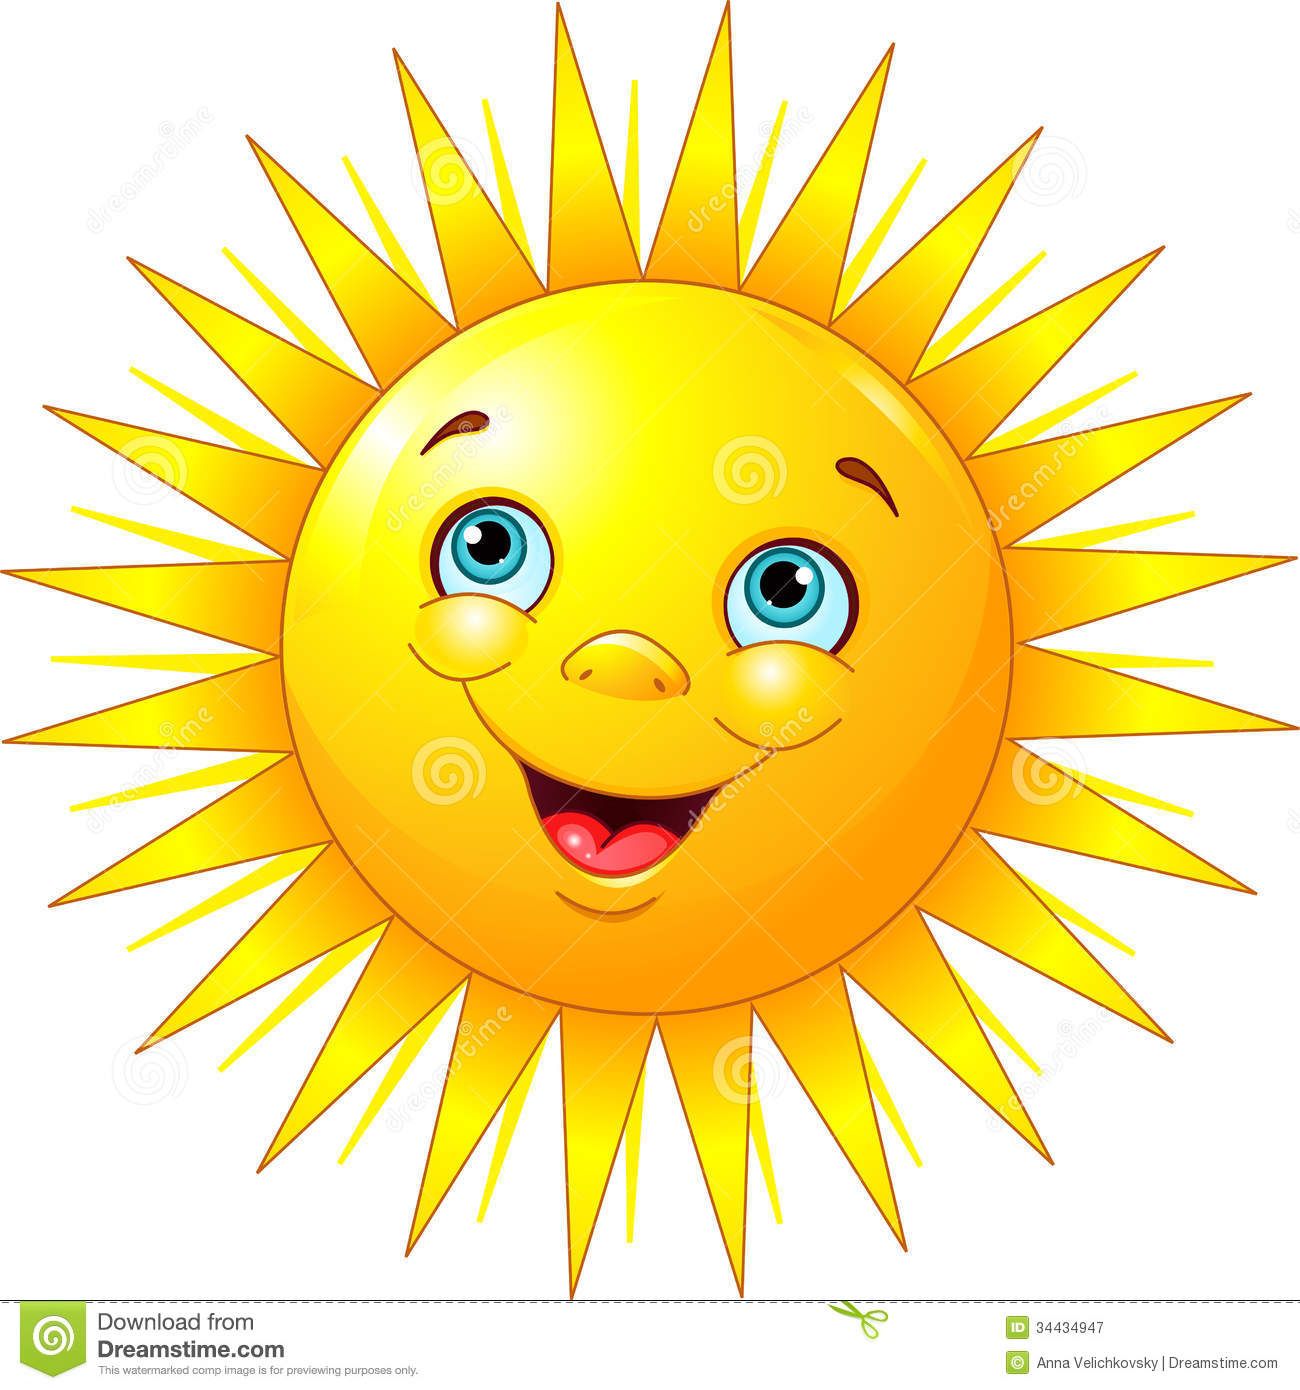 Smiling Sun Royalty Free Stock Photography